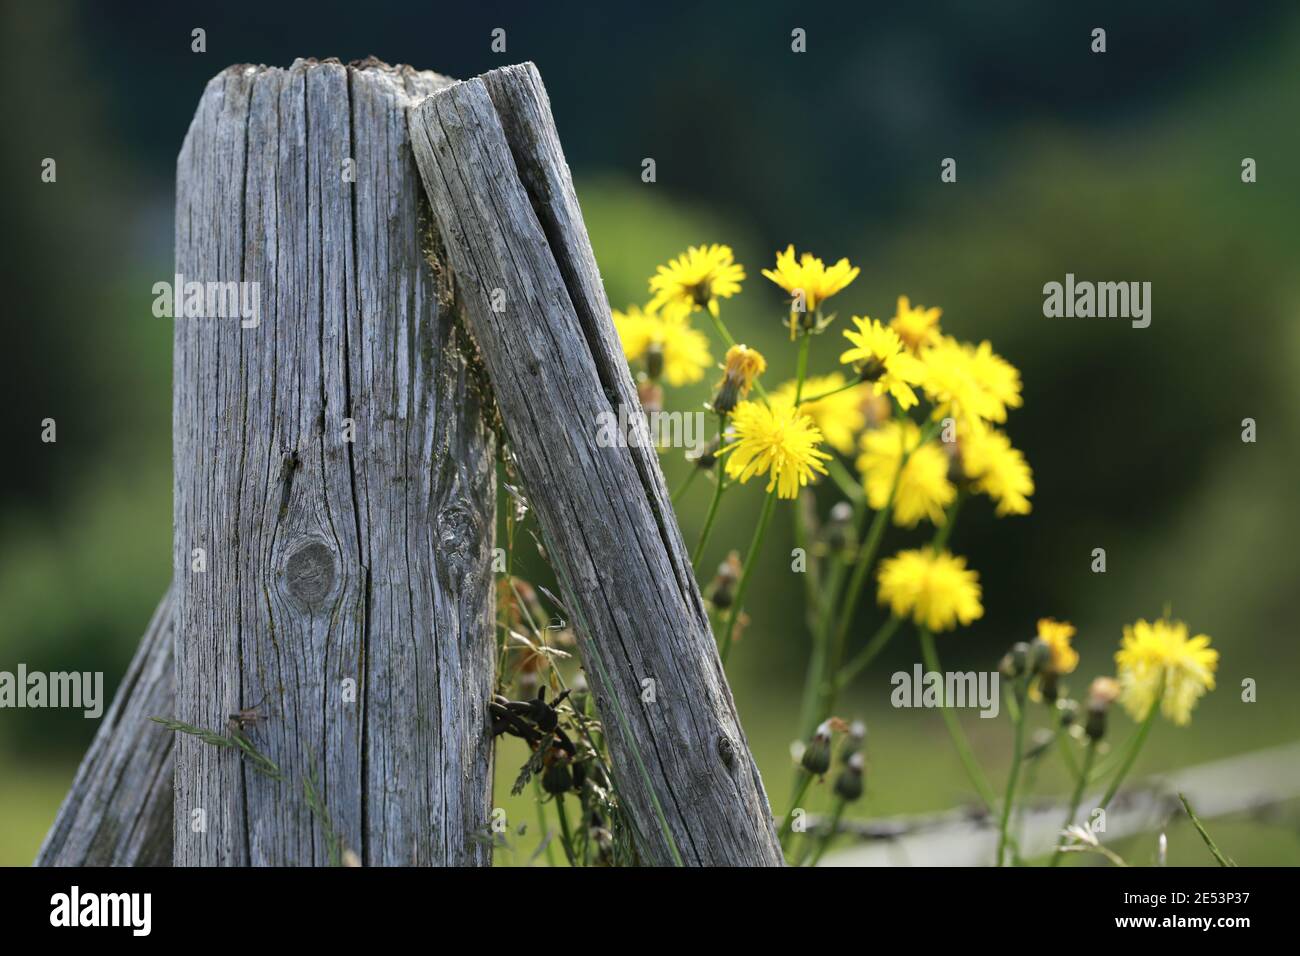 Detail of old wooden fence with yellow flowers in background Stock Photo